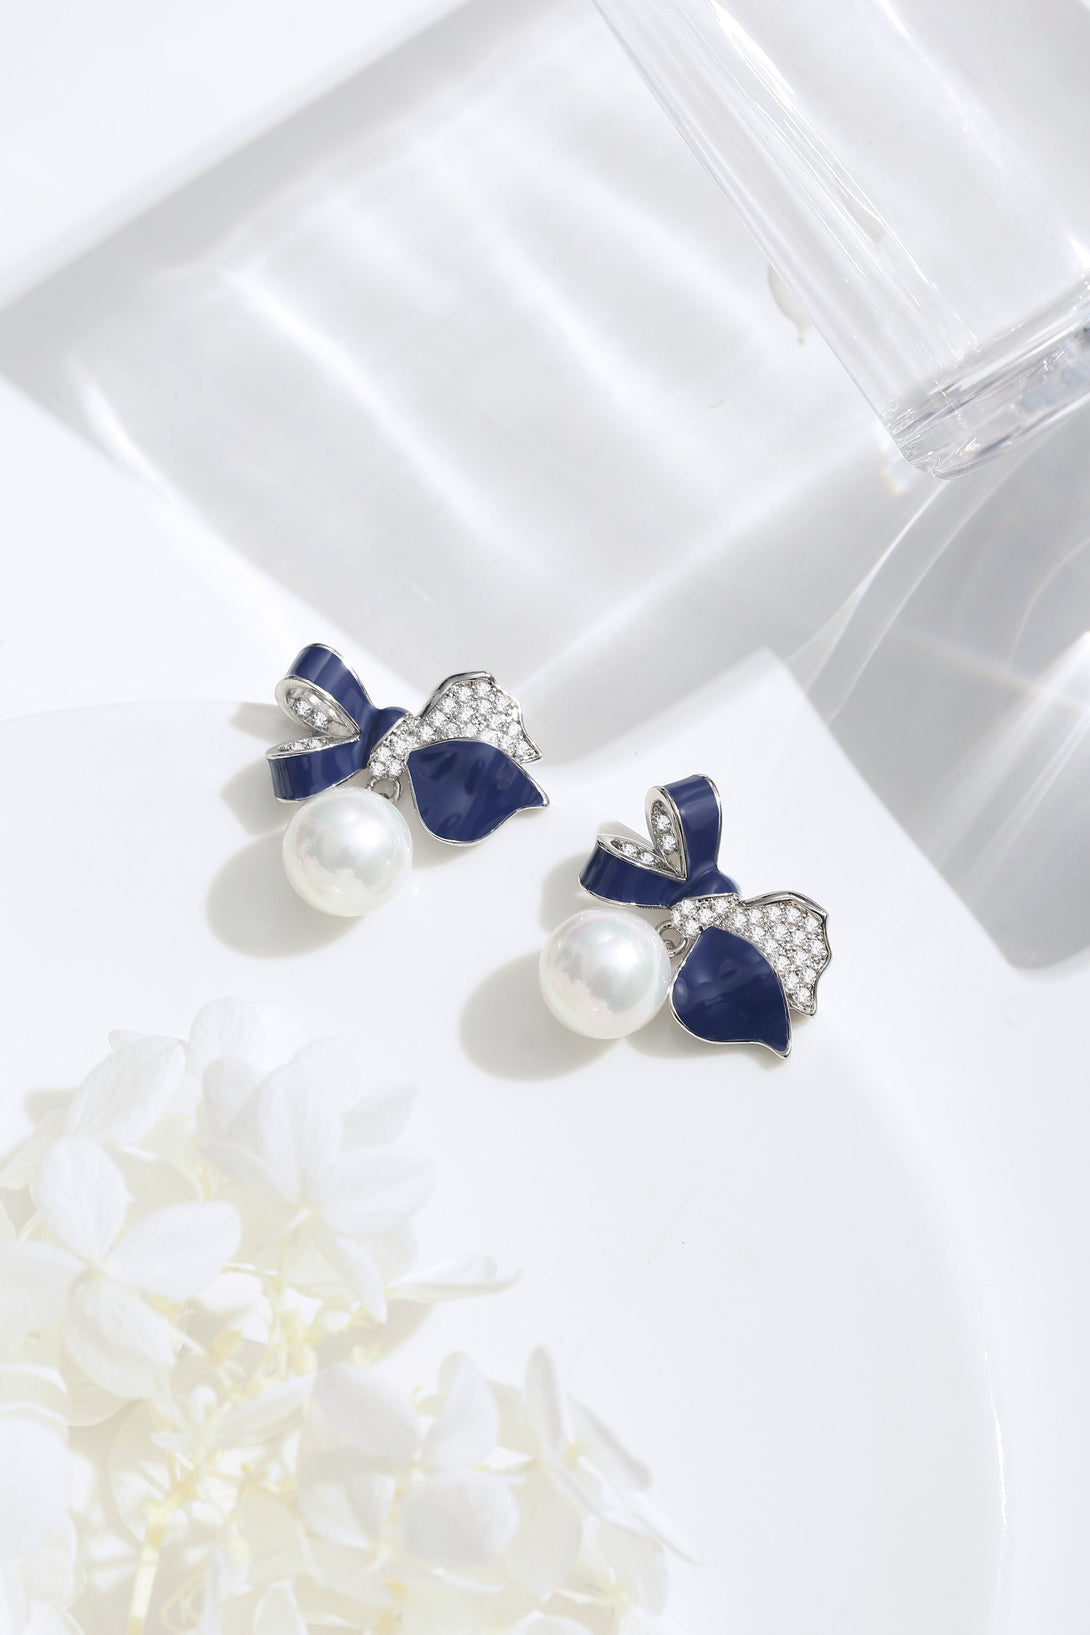 Blue Enamel Butterfly Earrings and Necklace - Classicharms